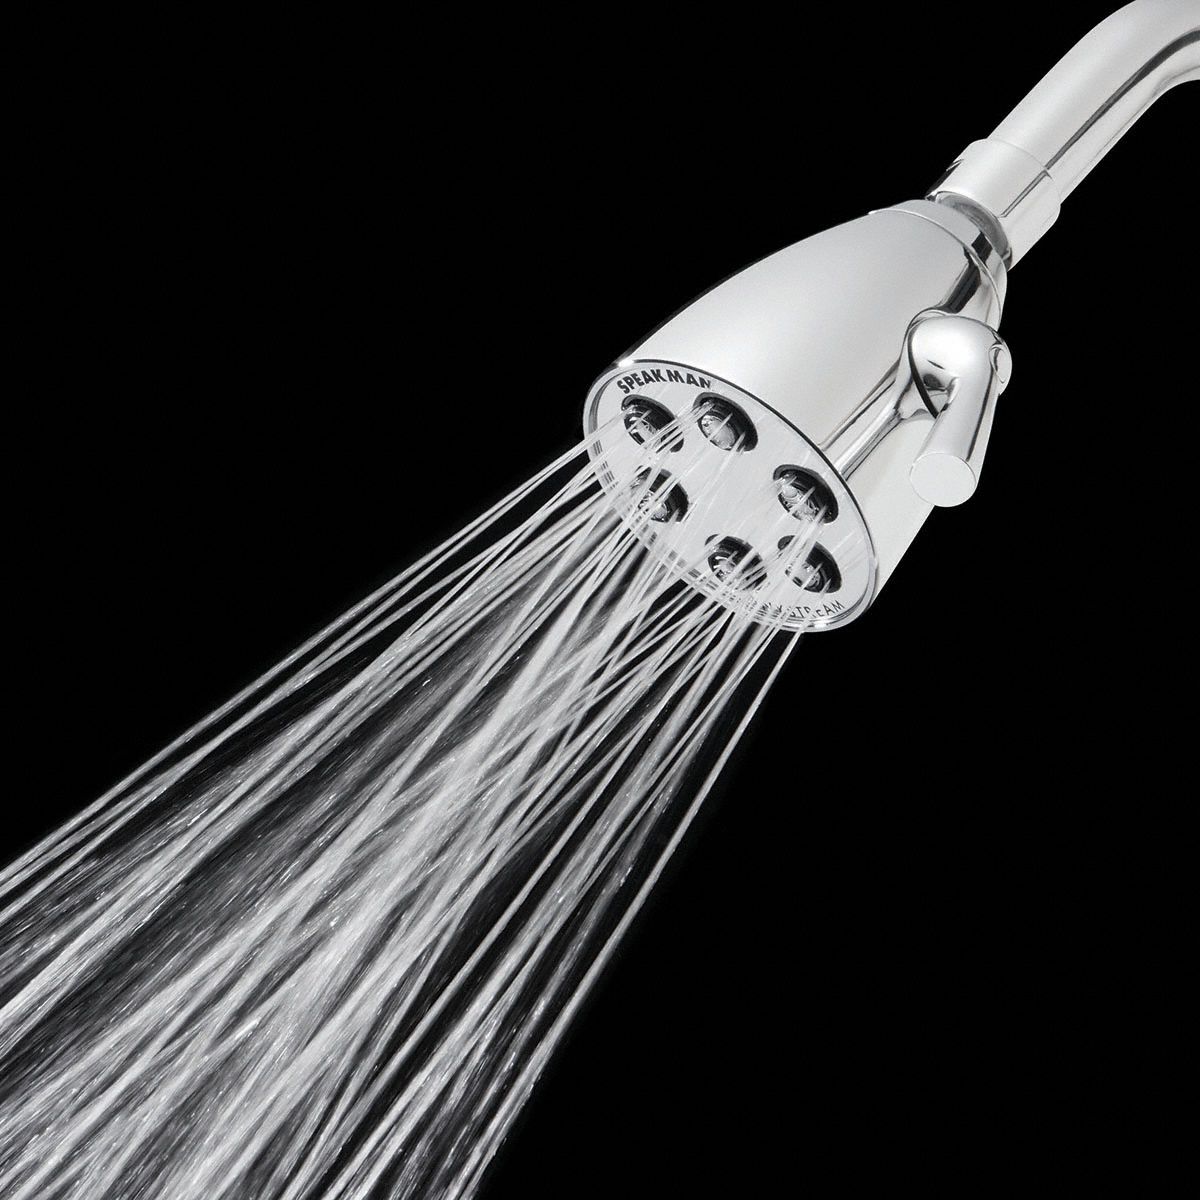 Showerhead: Speakman, Icon S-2252, 2.5 gpm Fixed Showerhead Flow Rate,  Polished Chrome Finish